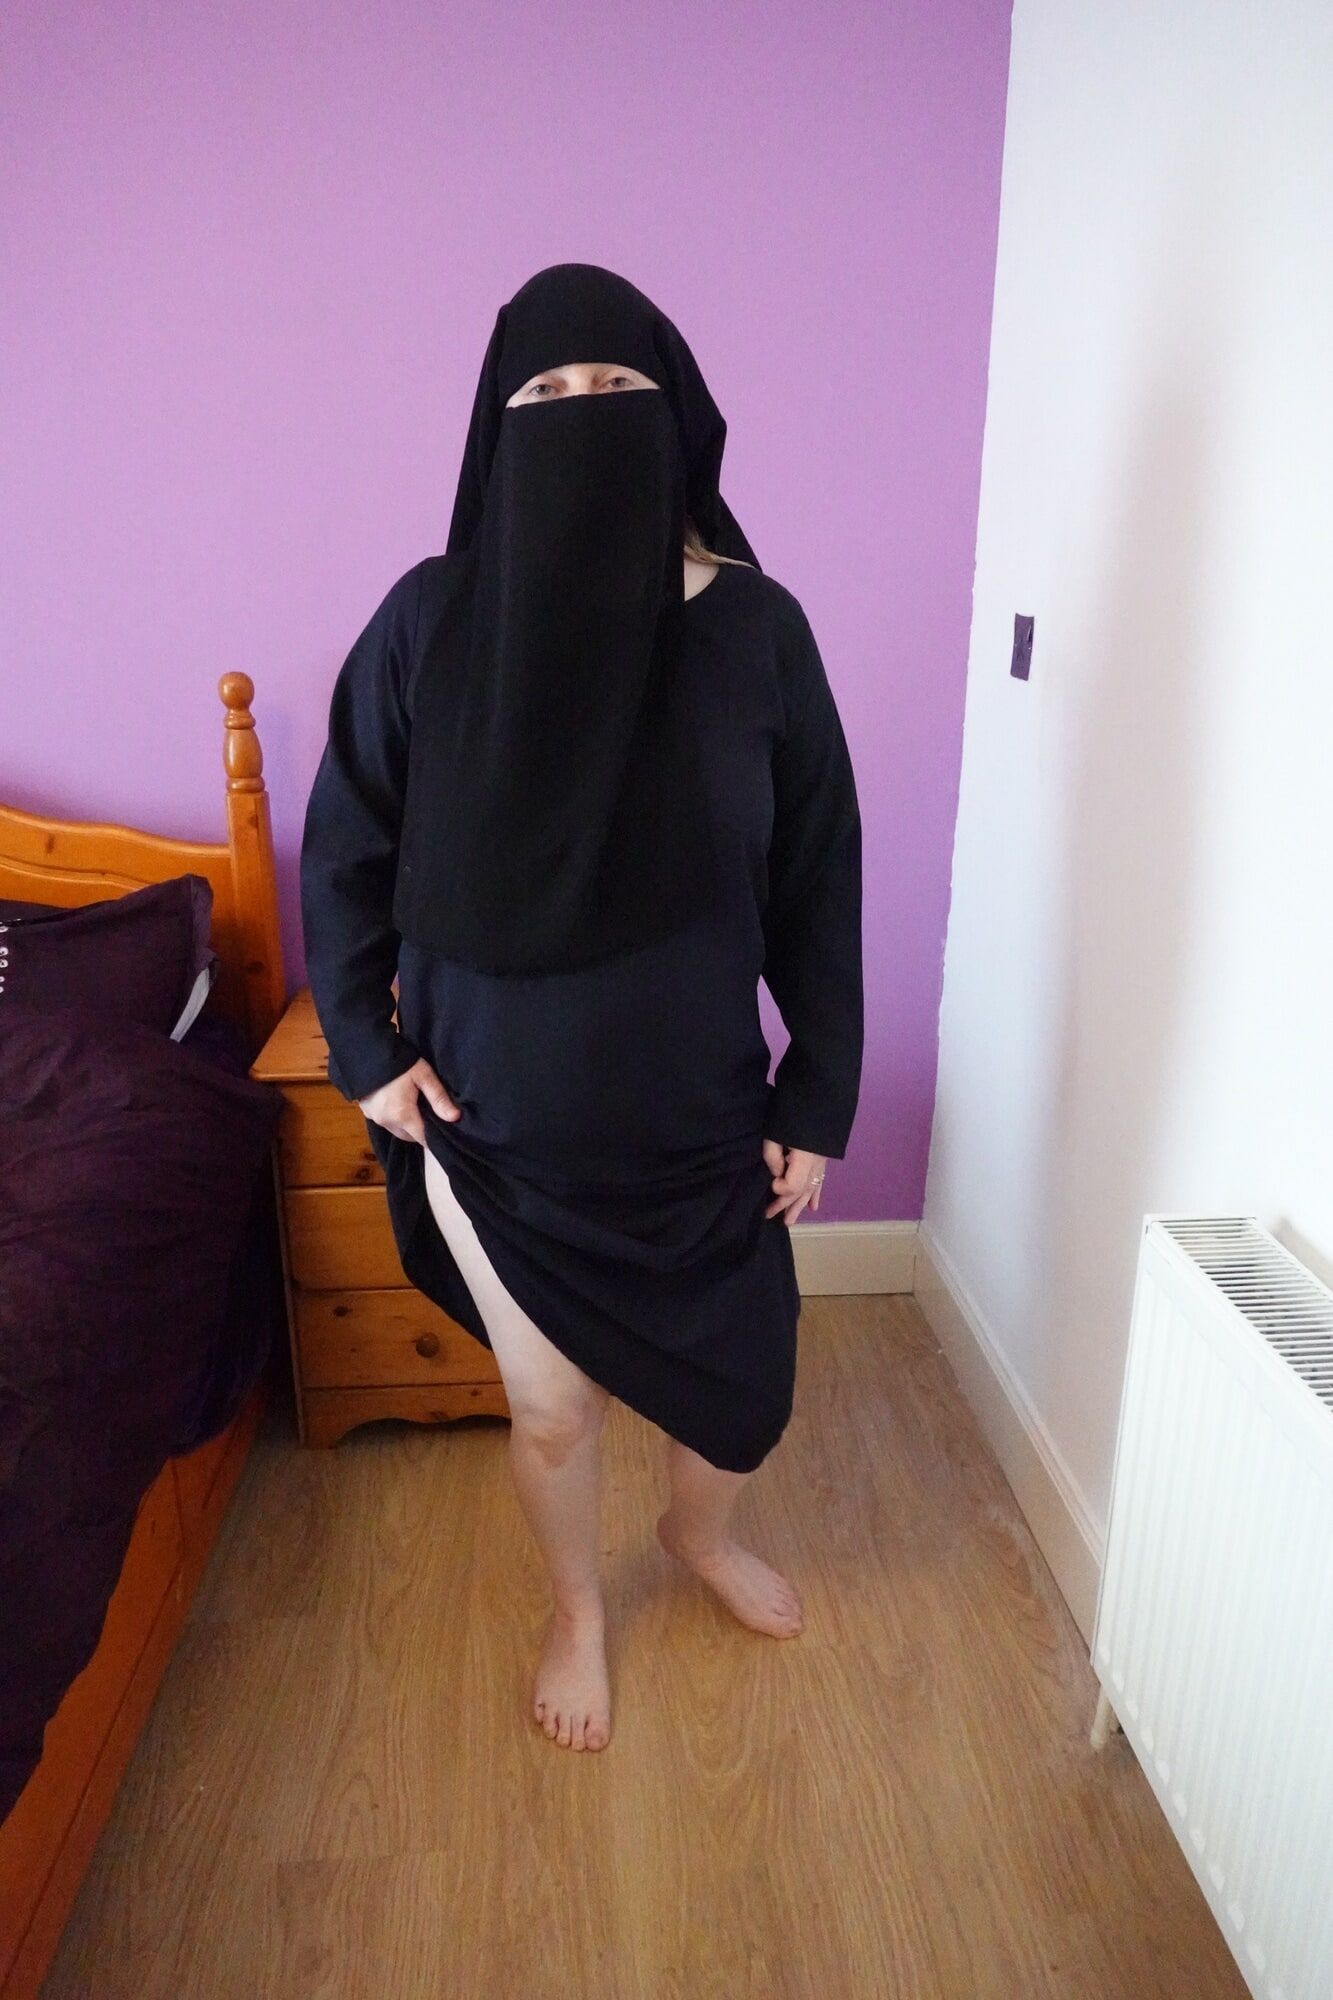 wife wearing Burqa with Niqab naked underneath #5